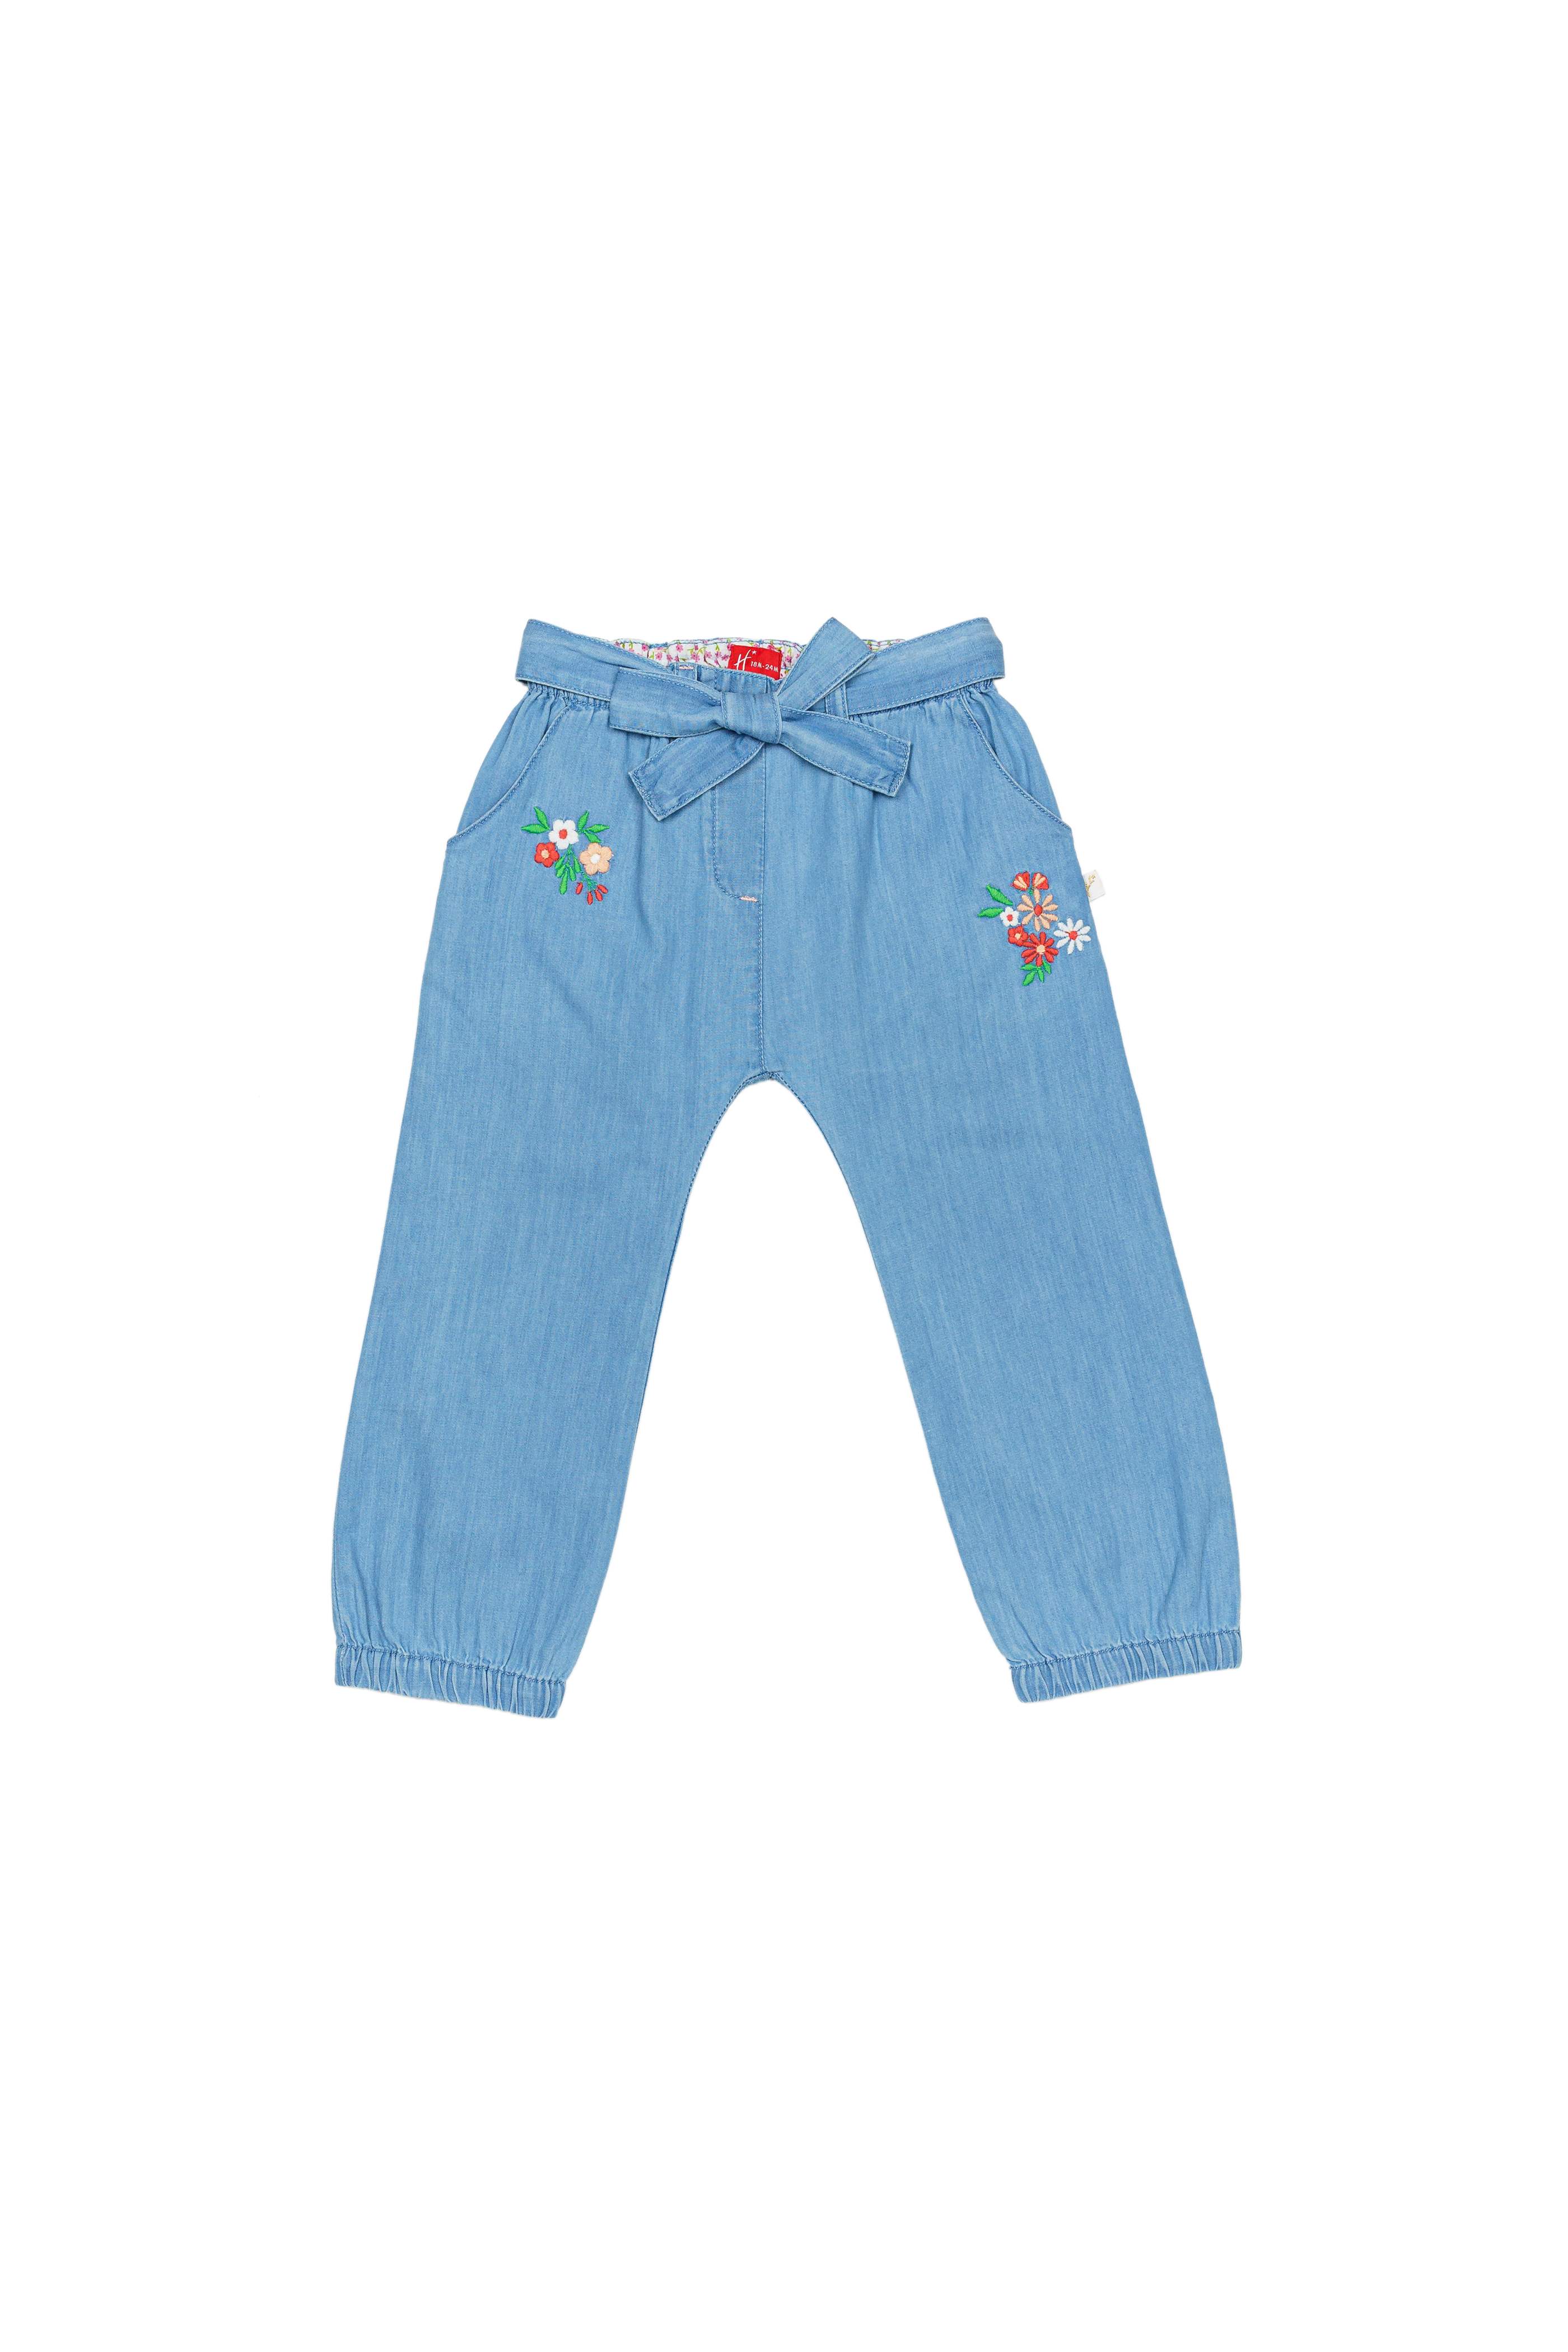 H by Hamleys Infant Girls Embroidered Blue Jogger Jeans